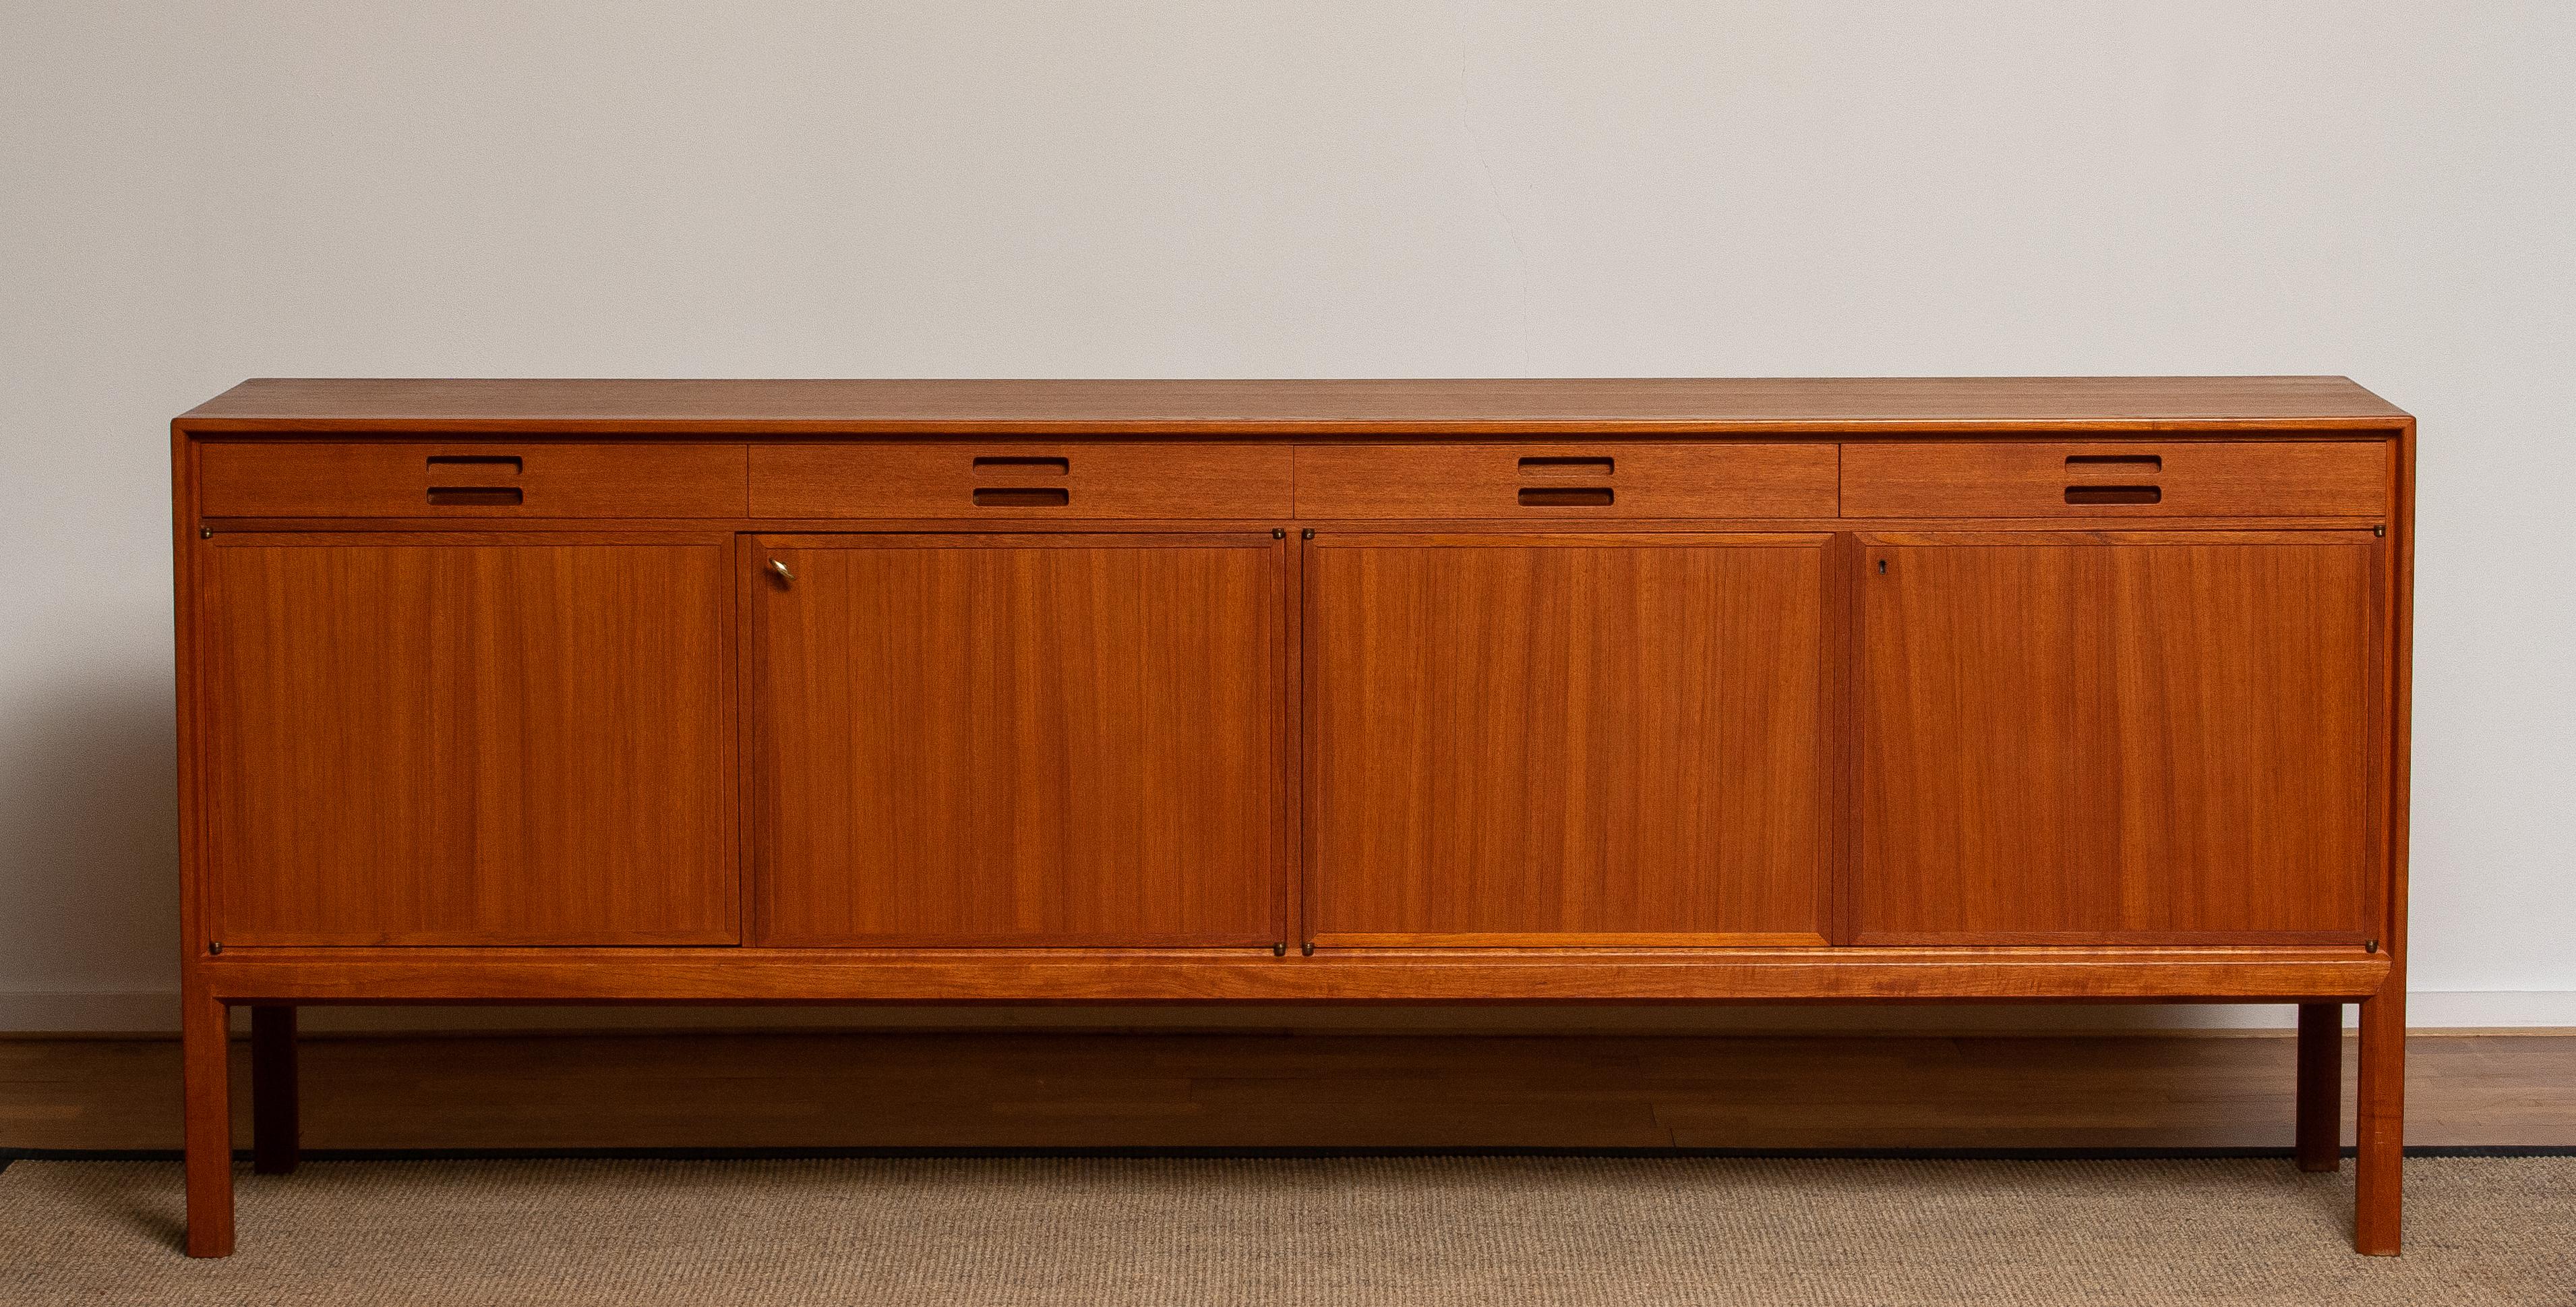 Teak sideboard designed by Bertil Fridhagen for Bodafors Bra Bohag from Sweden.
The sideboard is in an excellent condition. Period 1950s.
 